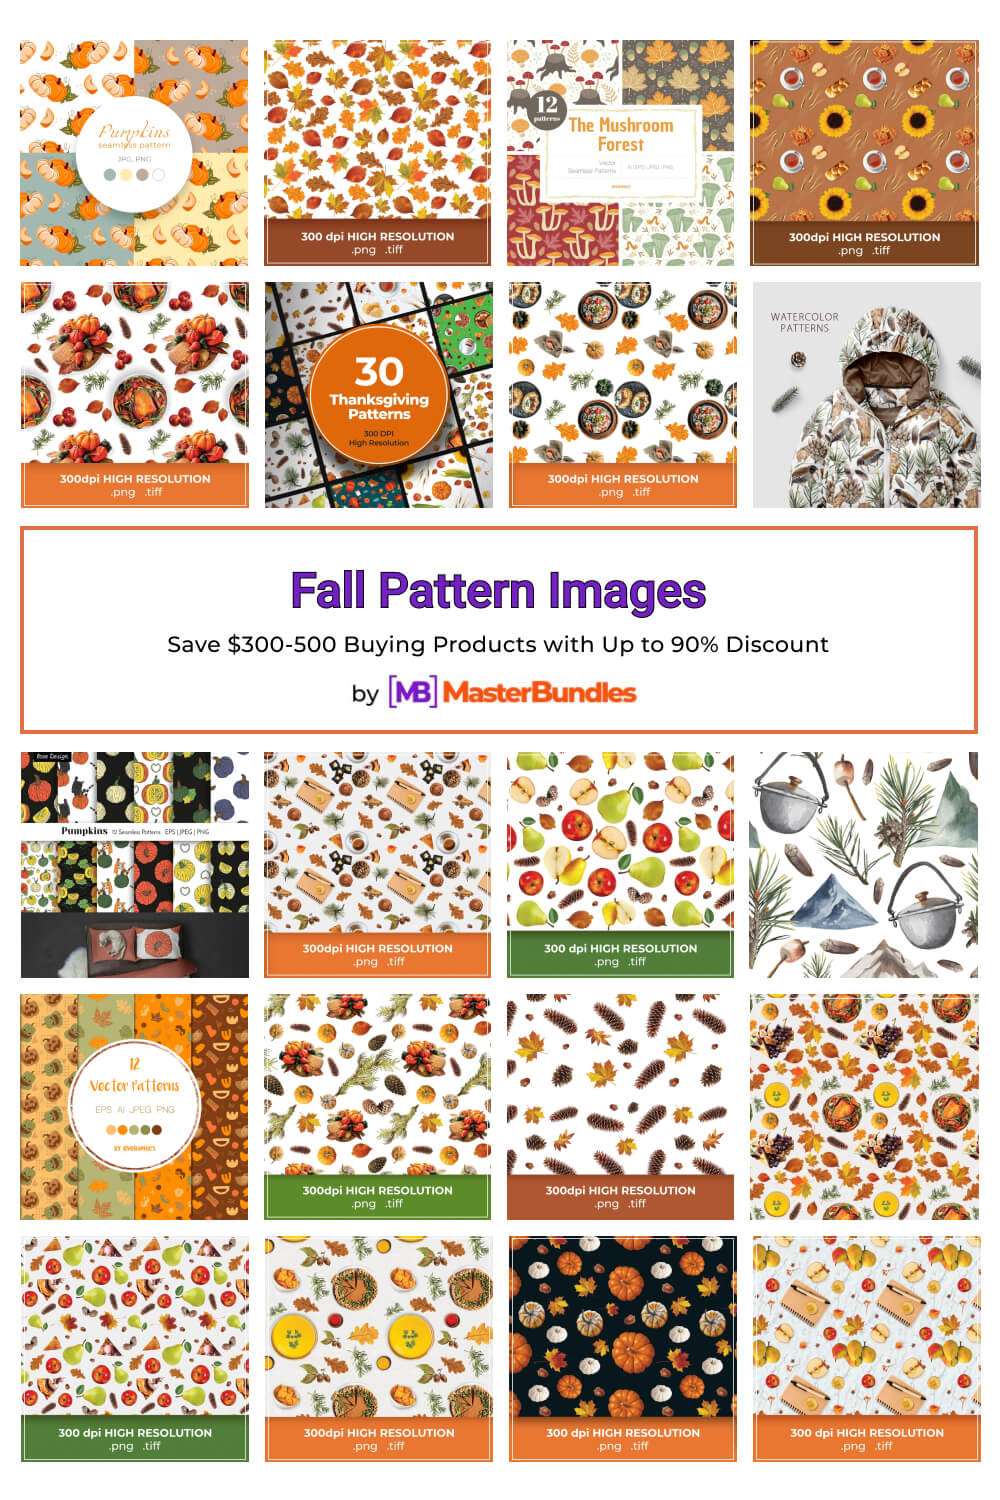 fall pattern images pinterest image.